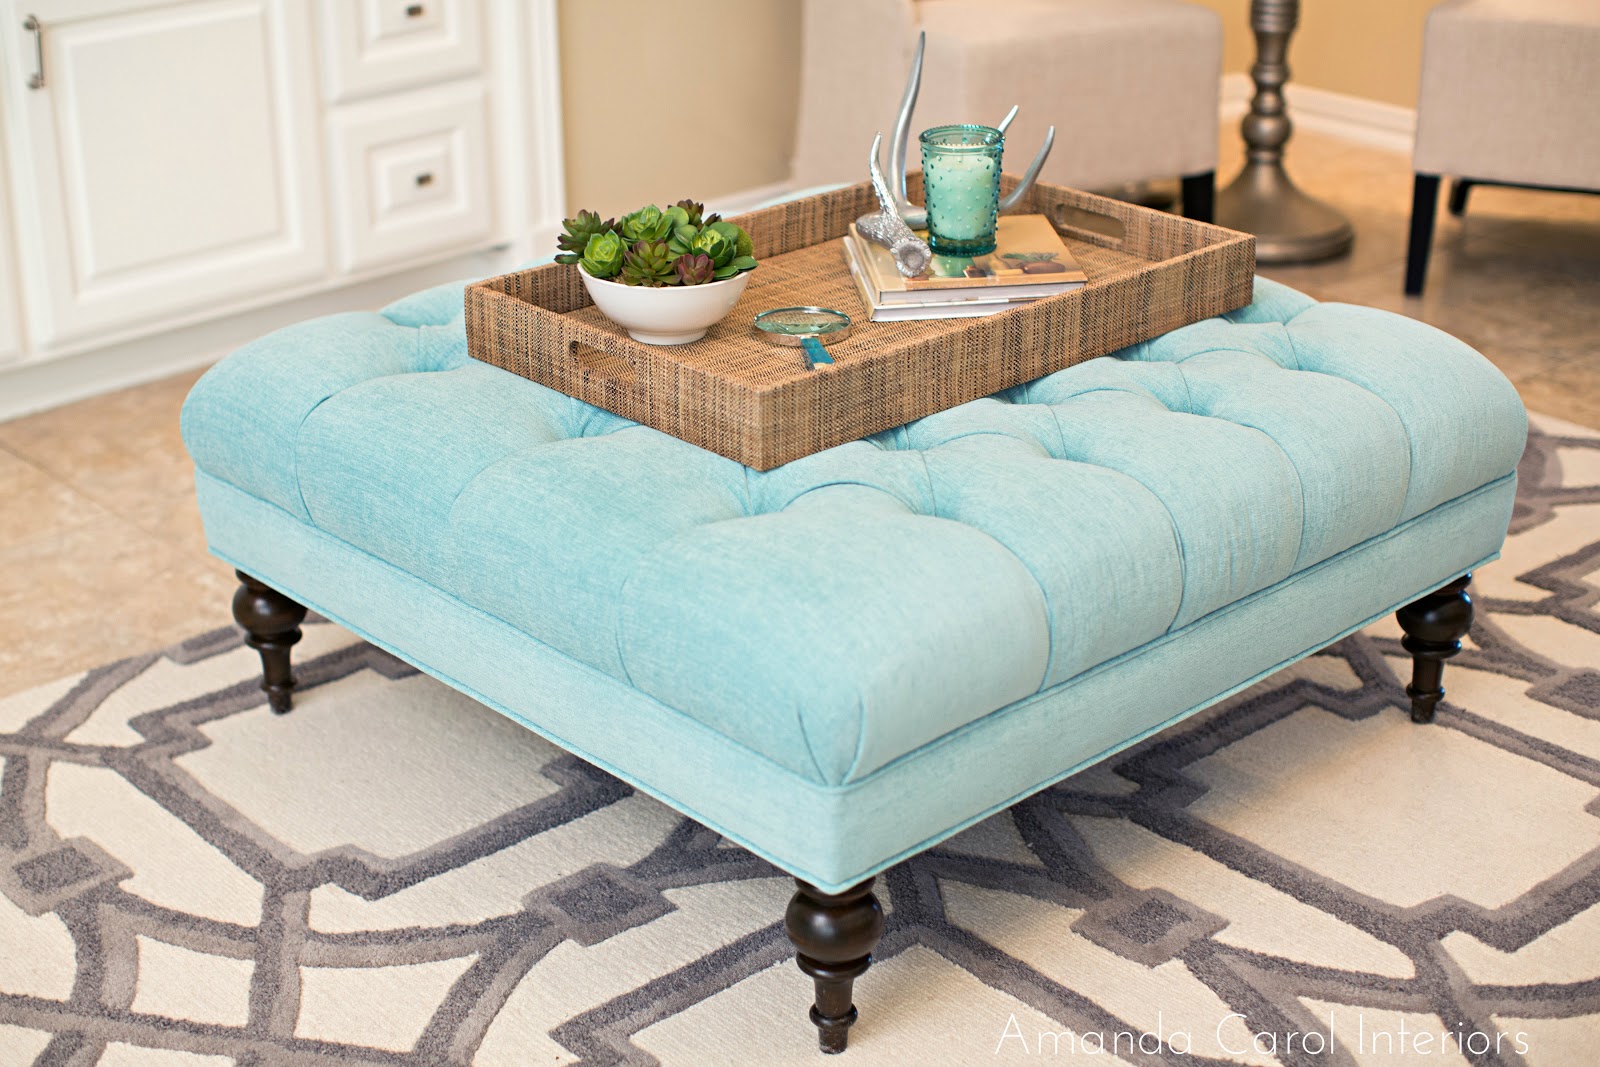 Living Room With Blue Ottoman Coffee Table